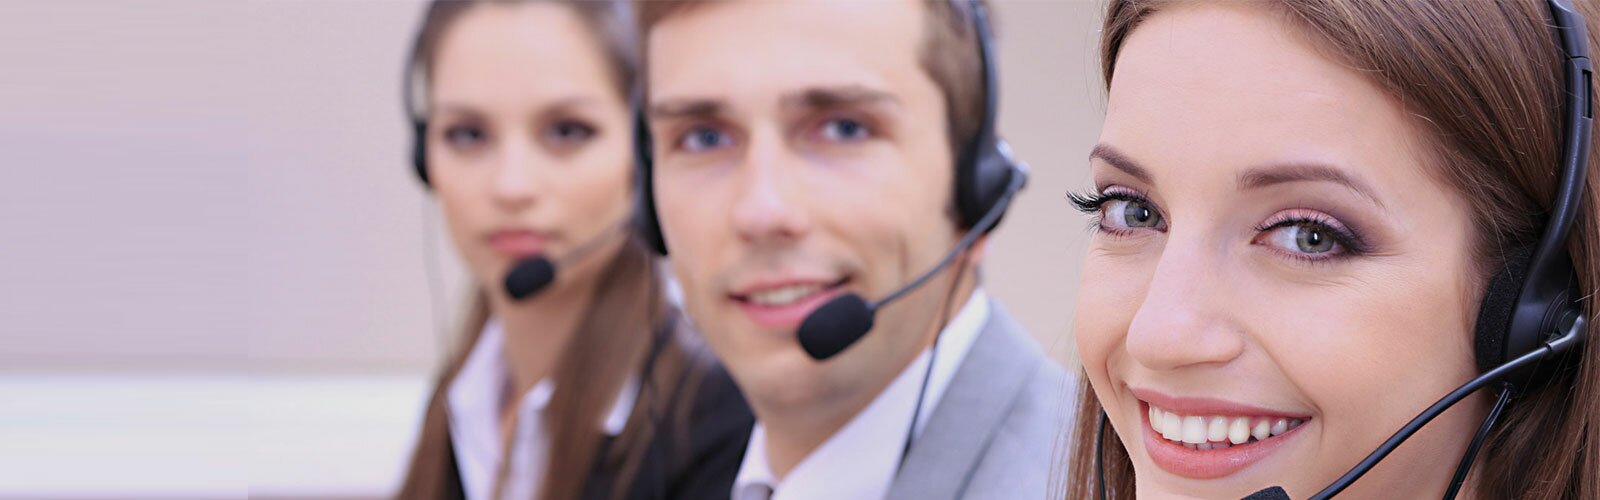 AVG Customer Service and Contact Number